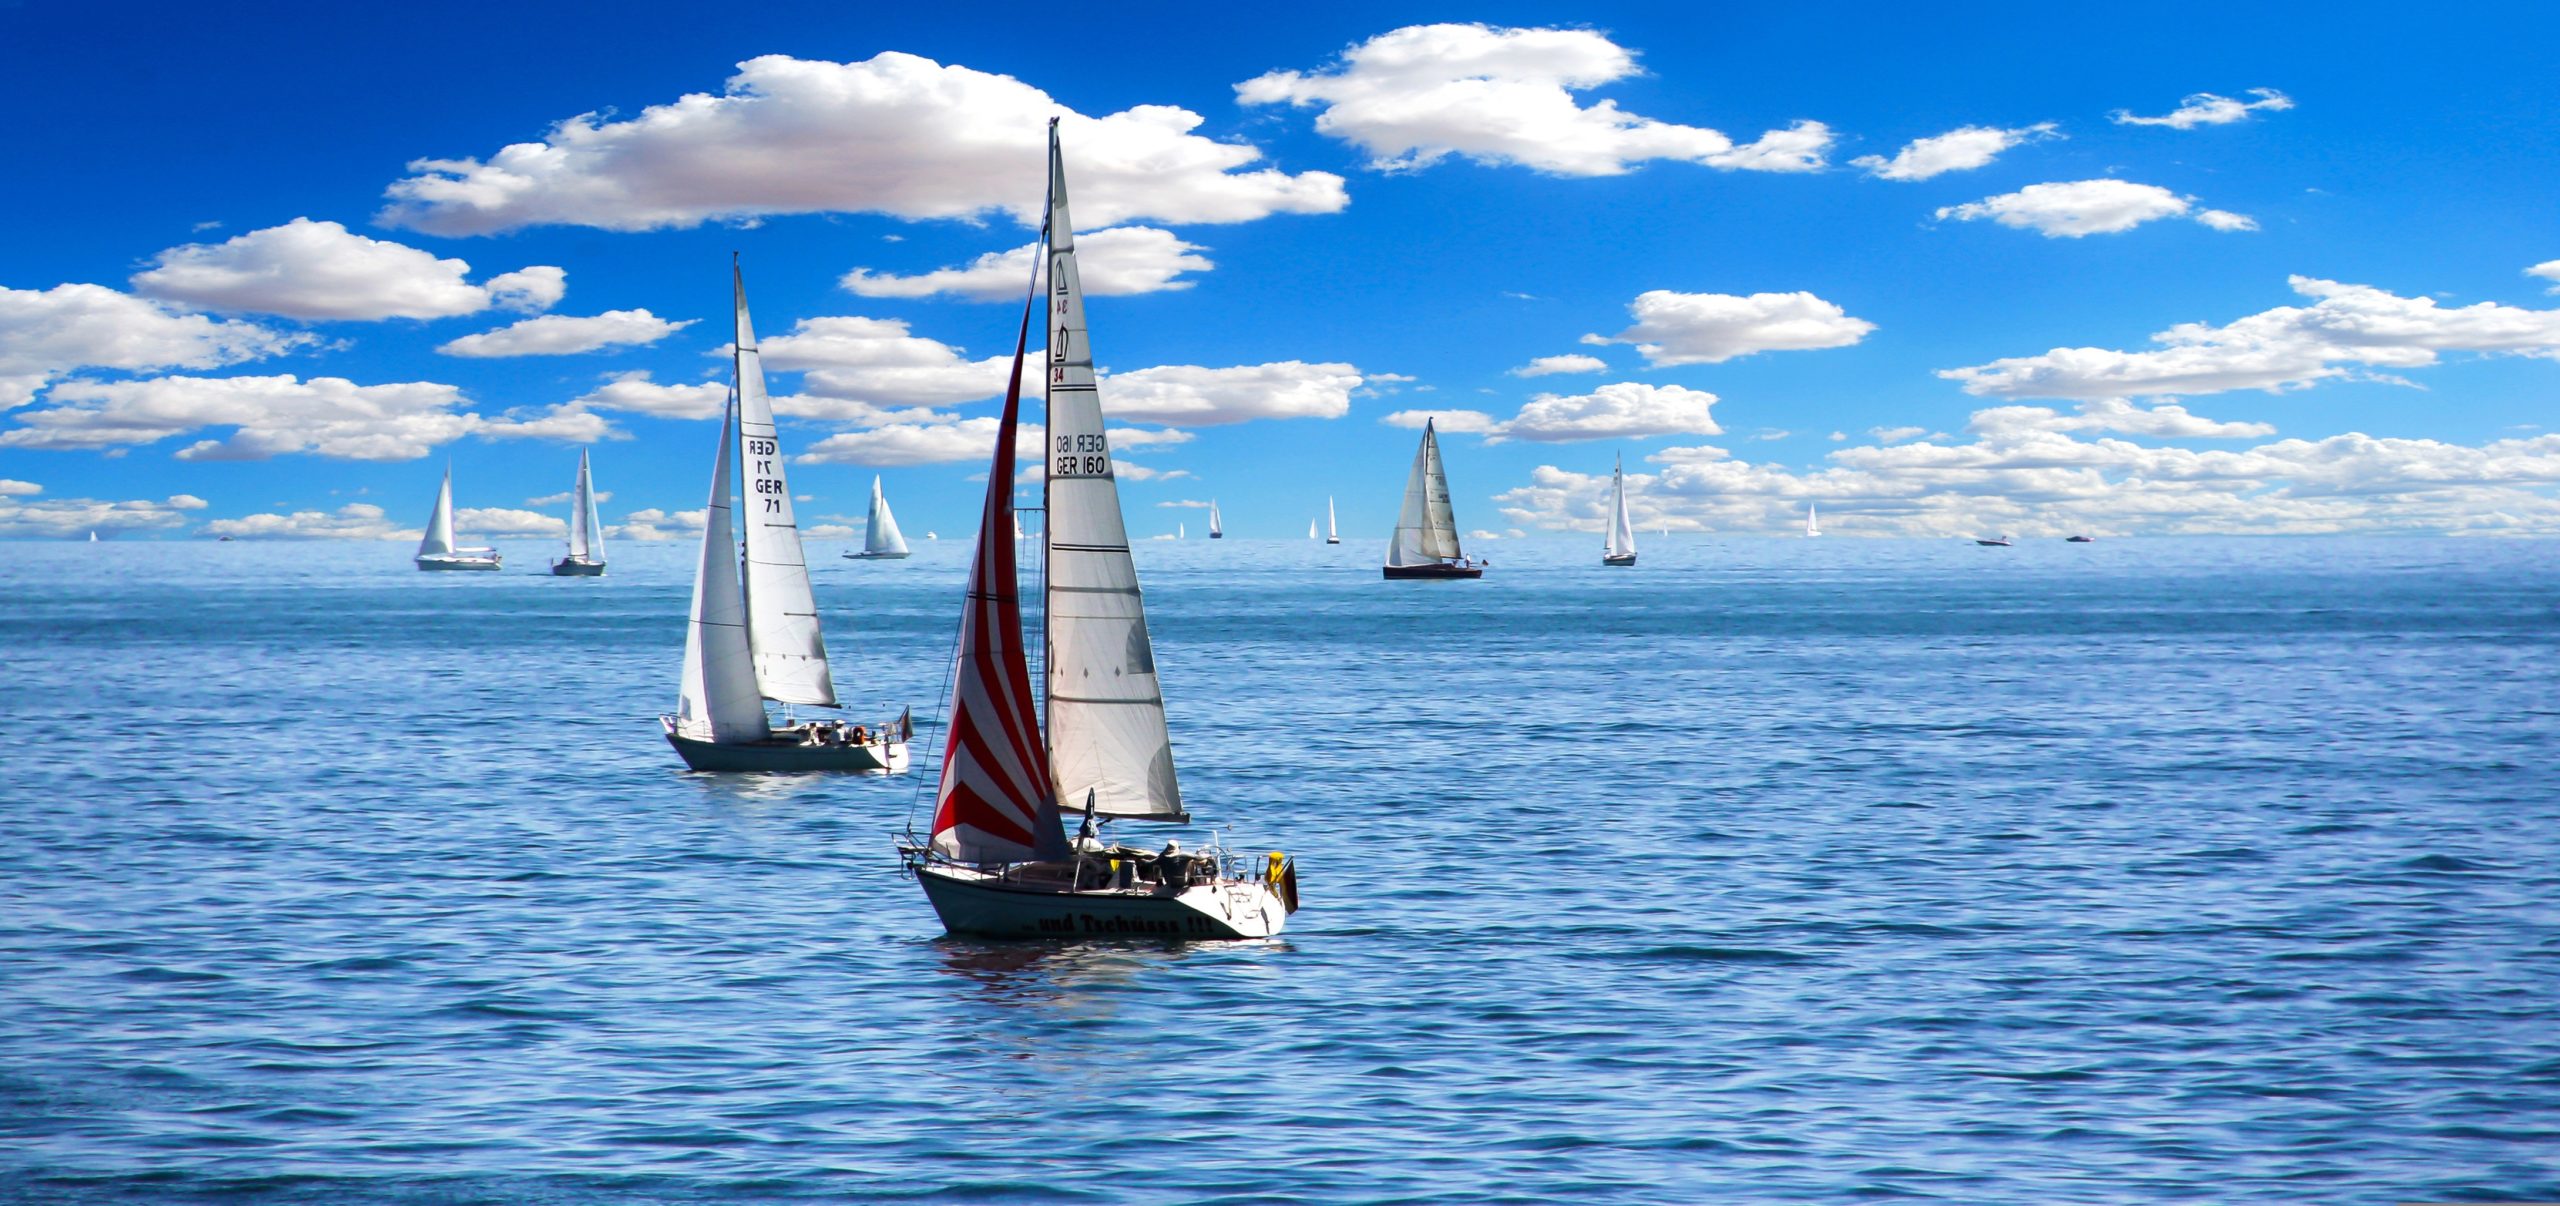 Sail Boats on the Ocean Representing the Wind Element